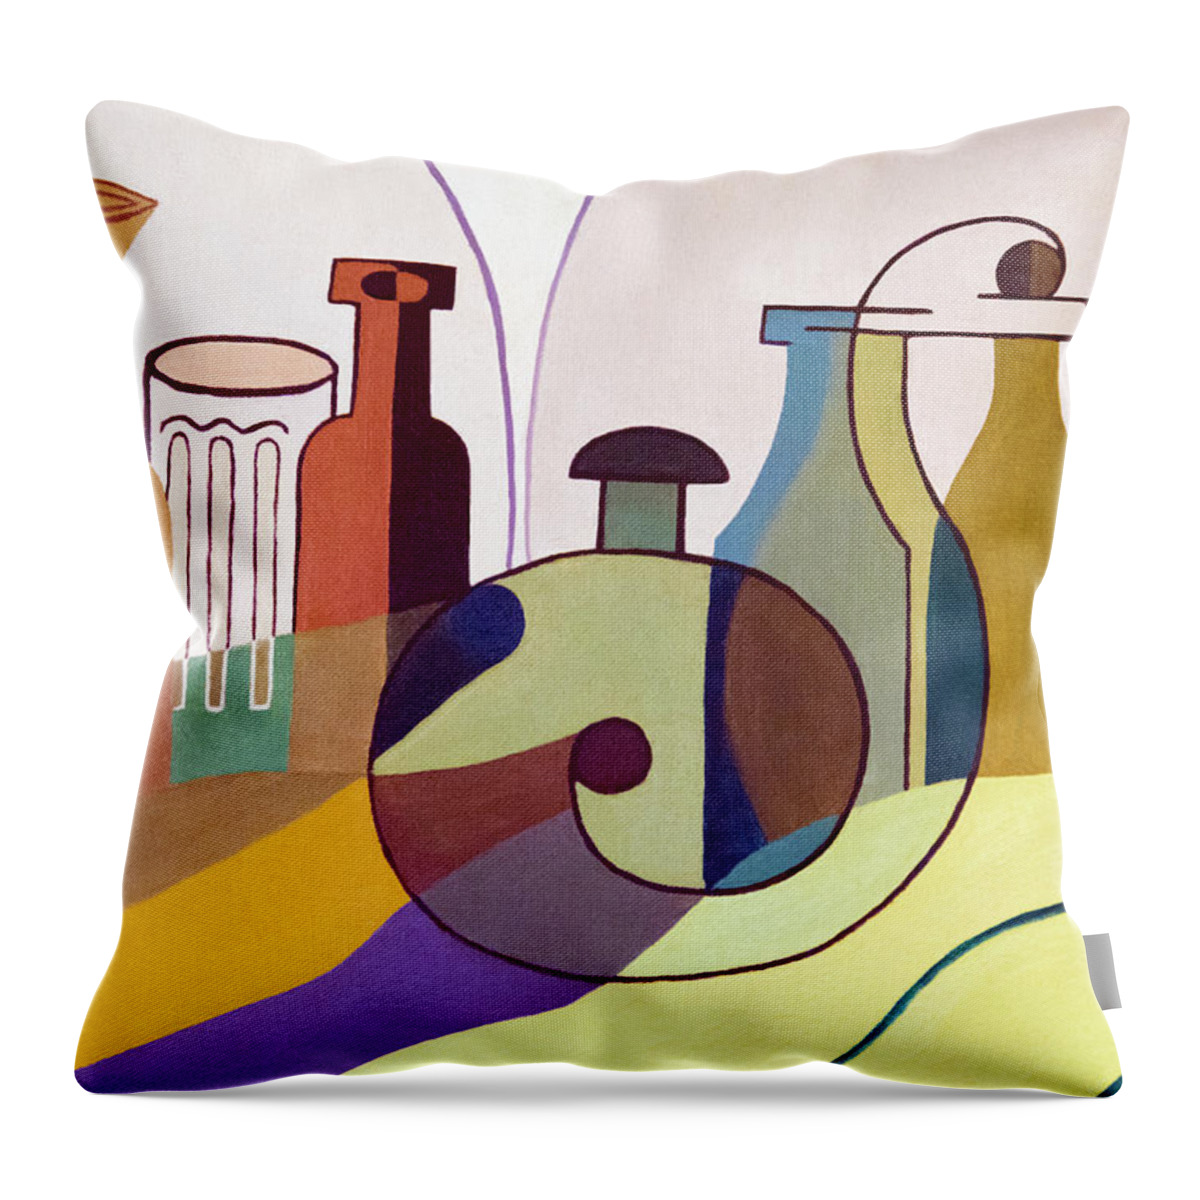 2d Throw Pillow featuring the painting Bottles And Glass - Cubism by Brian Wallace